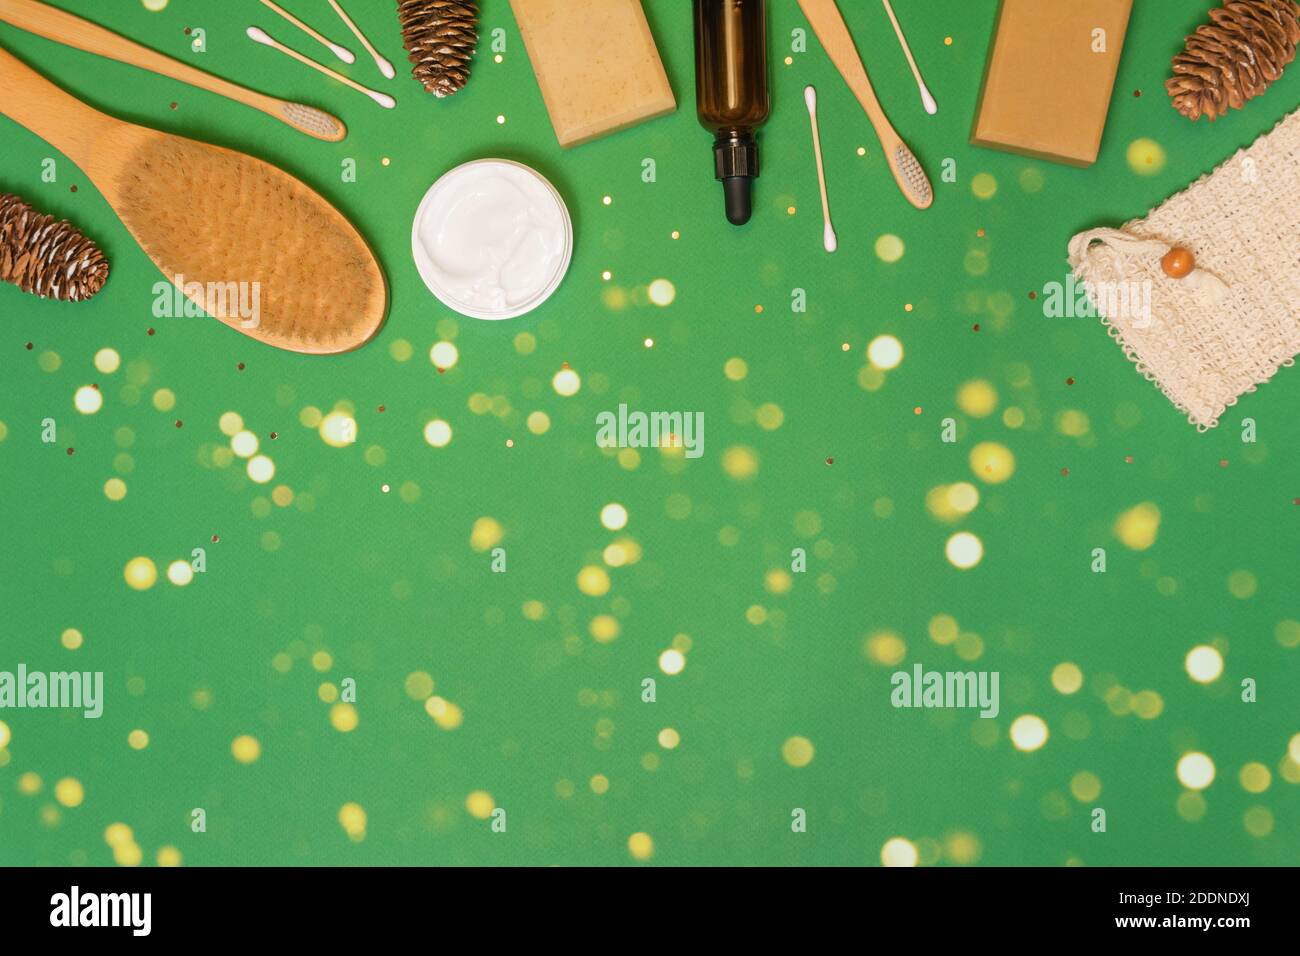 Natural zero waste cosmetics for healthy skin and face on green background with confetti and lights. Eco friendly product. Flat lay, copy space Stock Photo